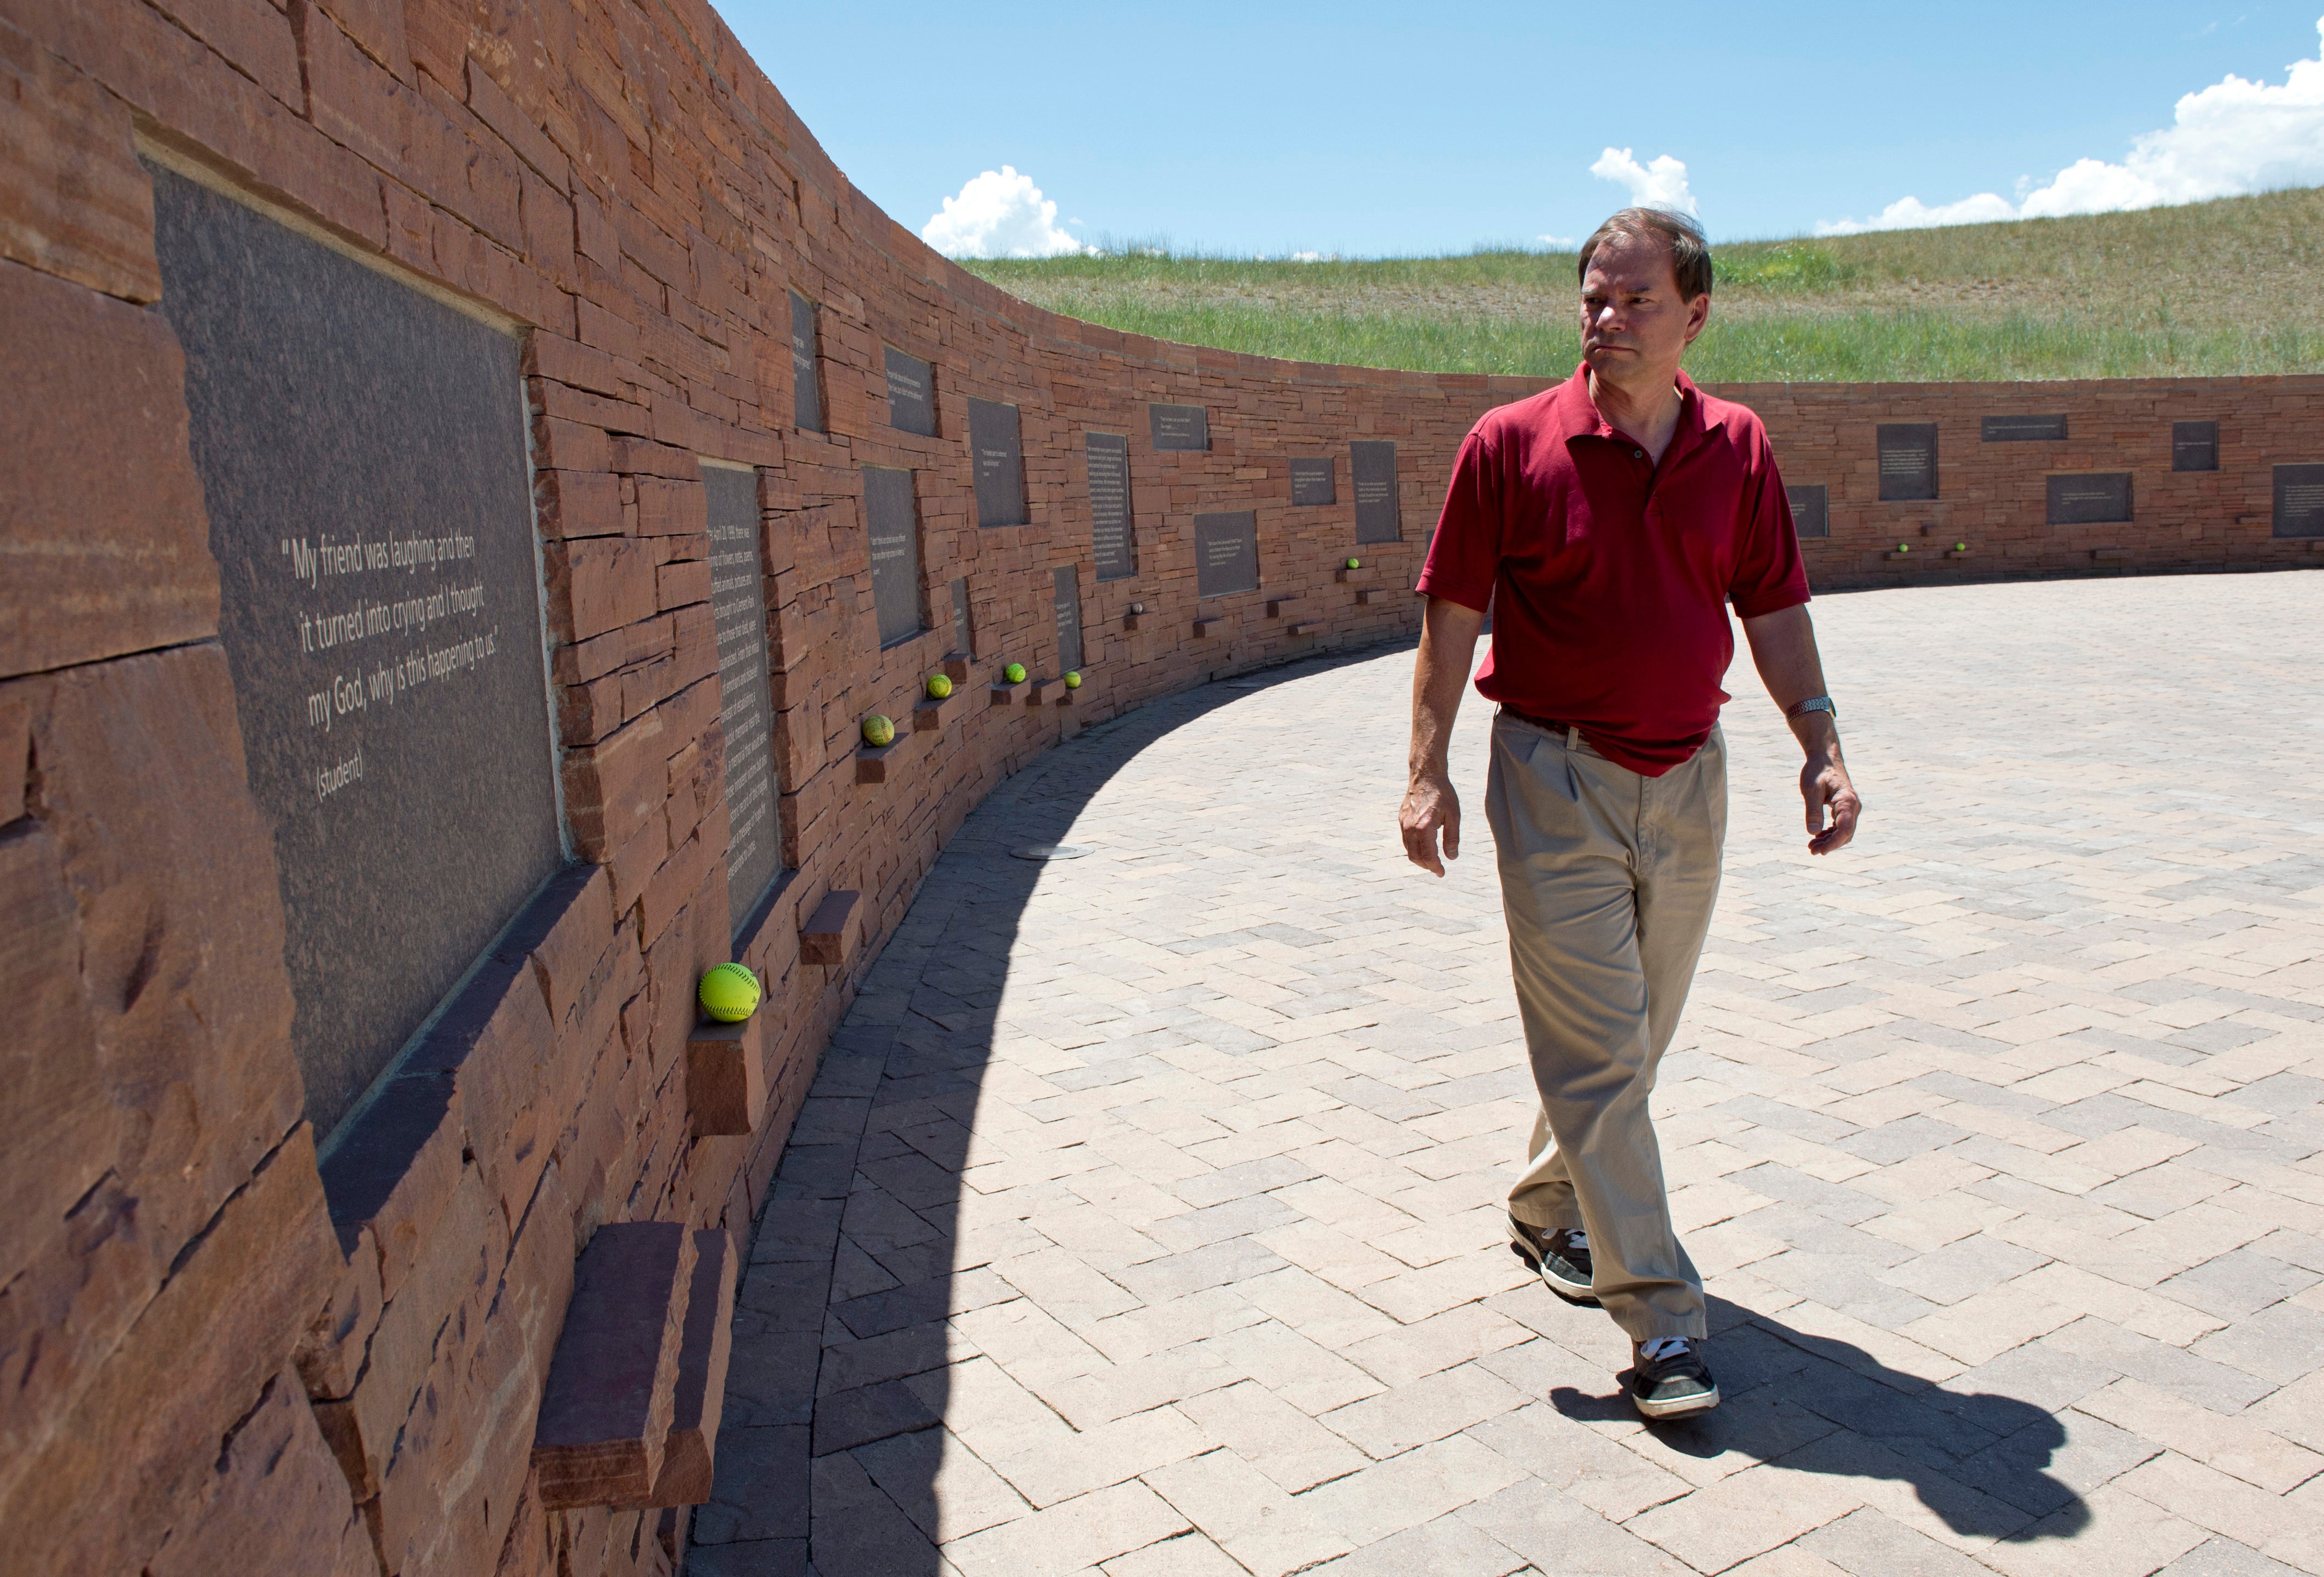 Tom Mauser, wearing his son Daniel's shoes, walks along a wall of the Columbine High School Memorial July 22, 2012 in Littleton, Colorado. Mauser, the father of Columbine High school shooting victim Daniel Mauser, has become an activist for increased gun control.